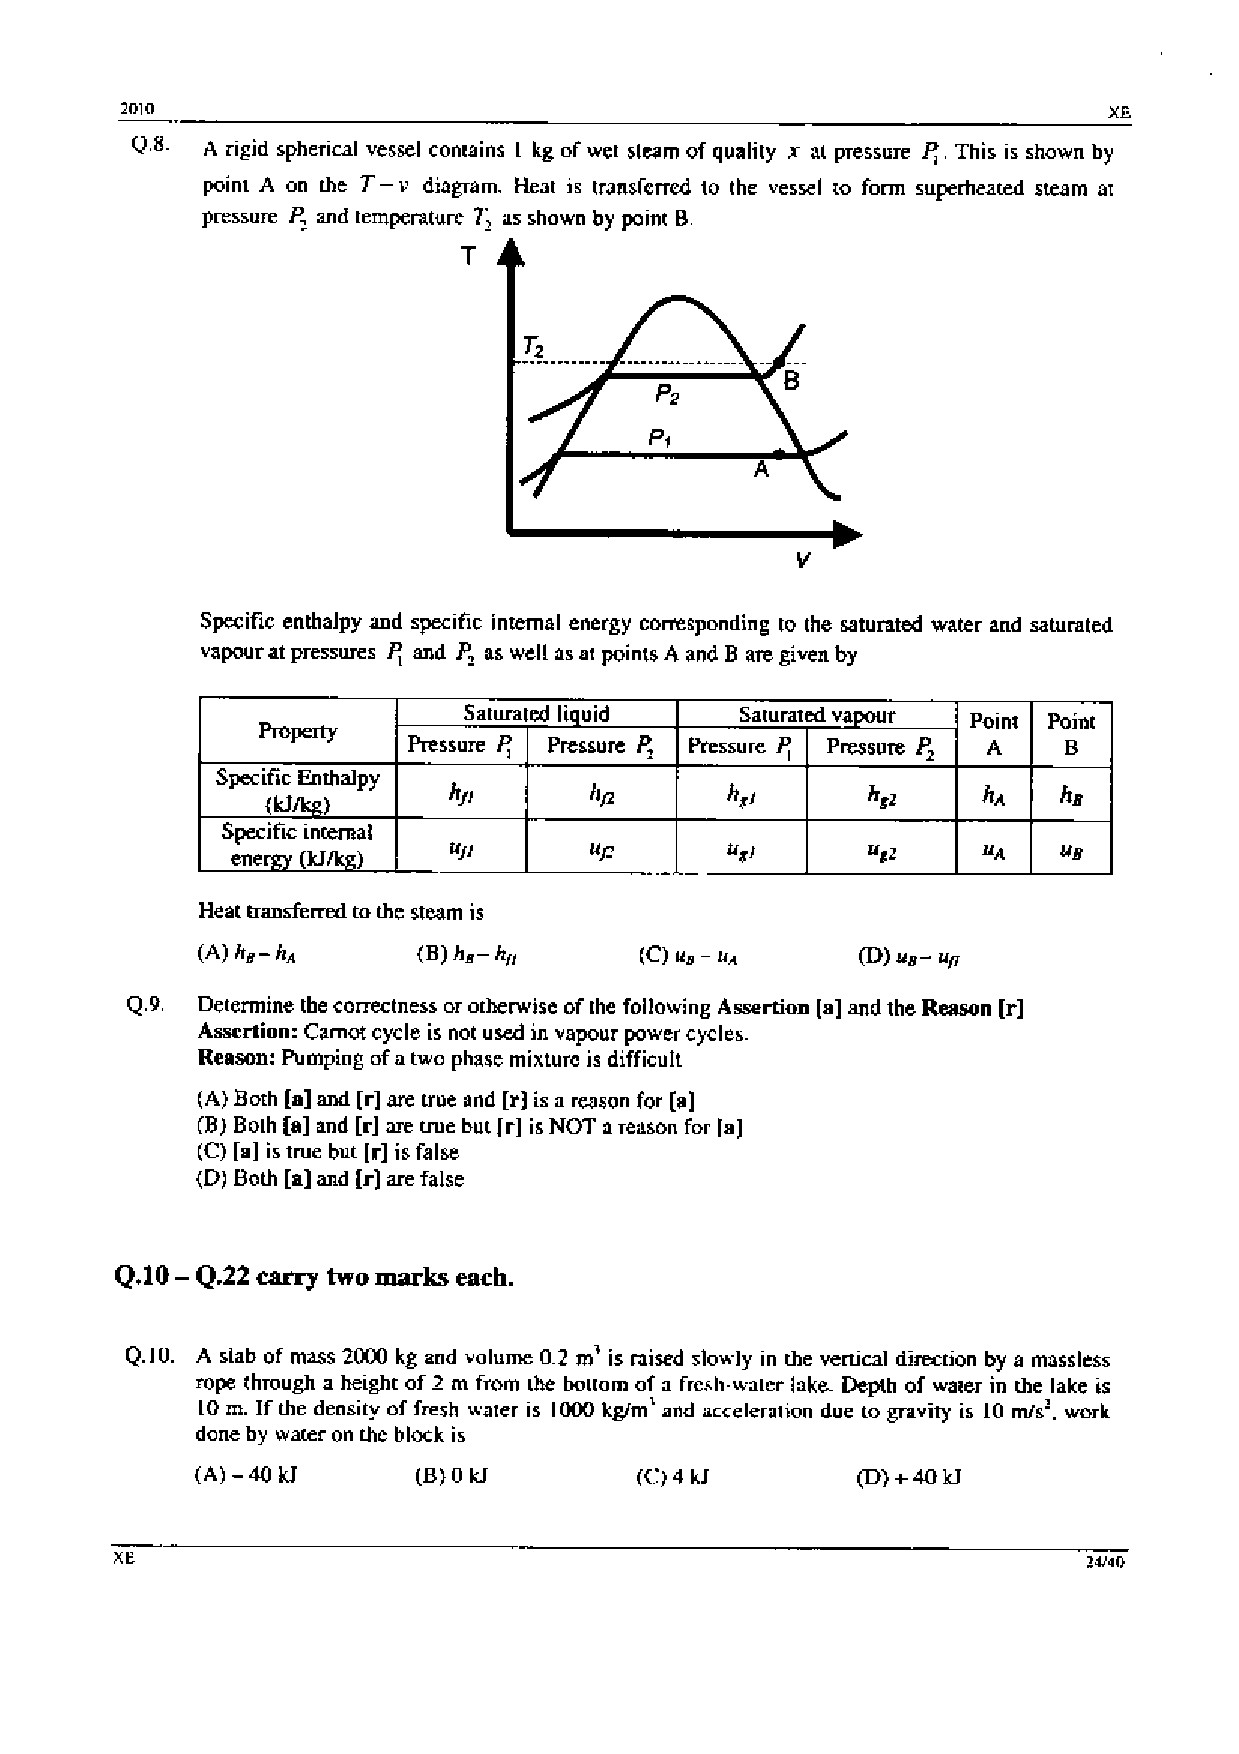 GATE Exam Question Paper 2010 Engineering Sciences 24